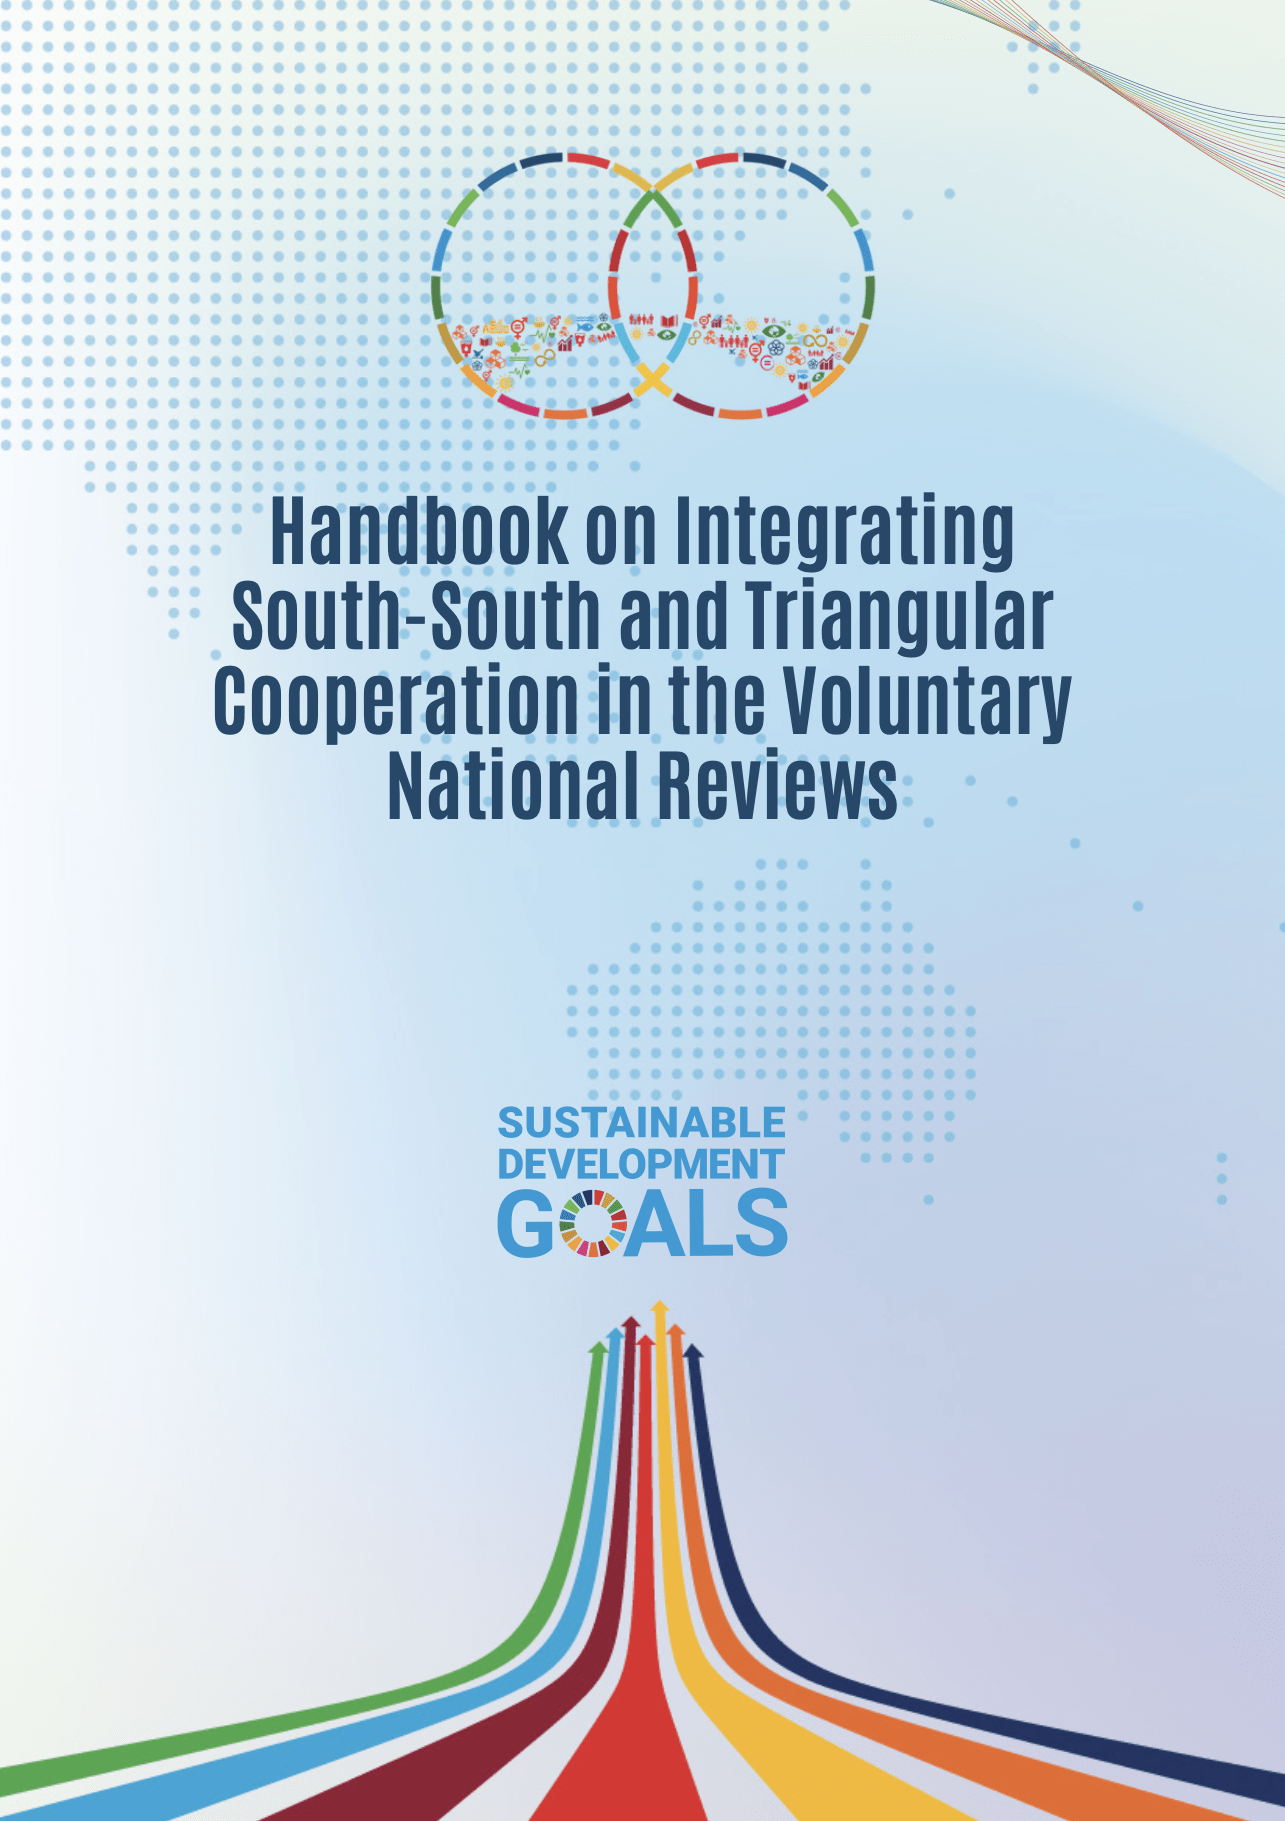 Handbook on Integrating South-South and Triangular Cooperation in the Voluntary National Reviews